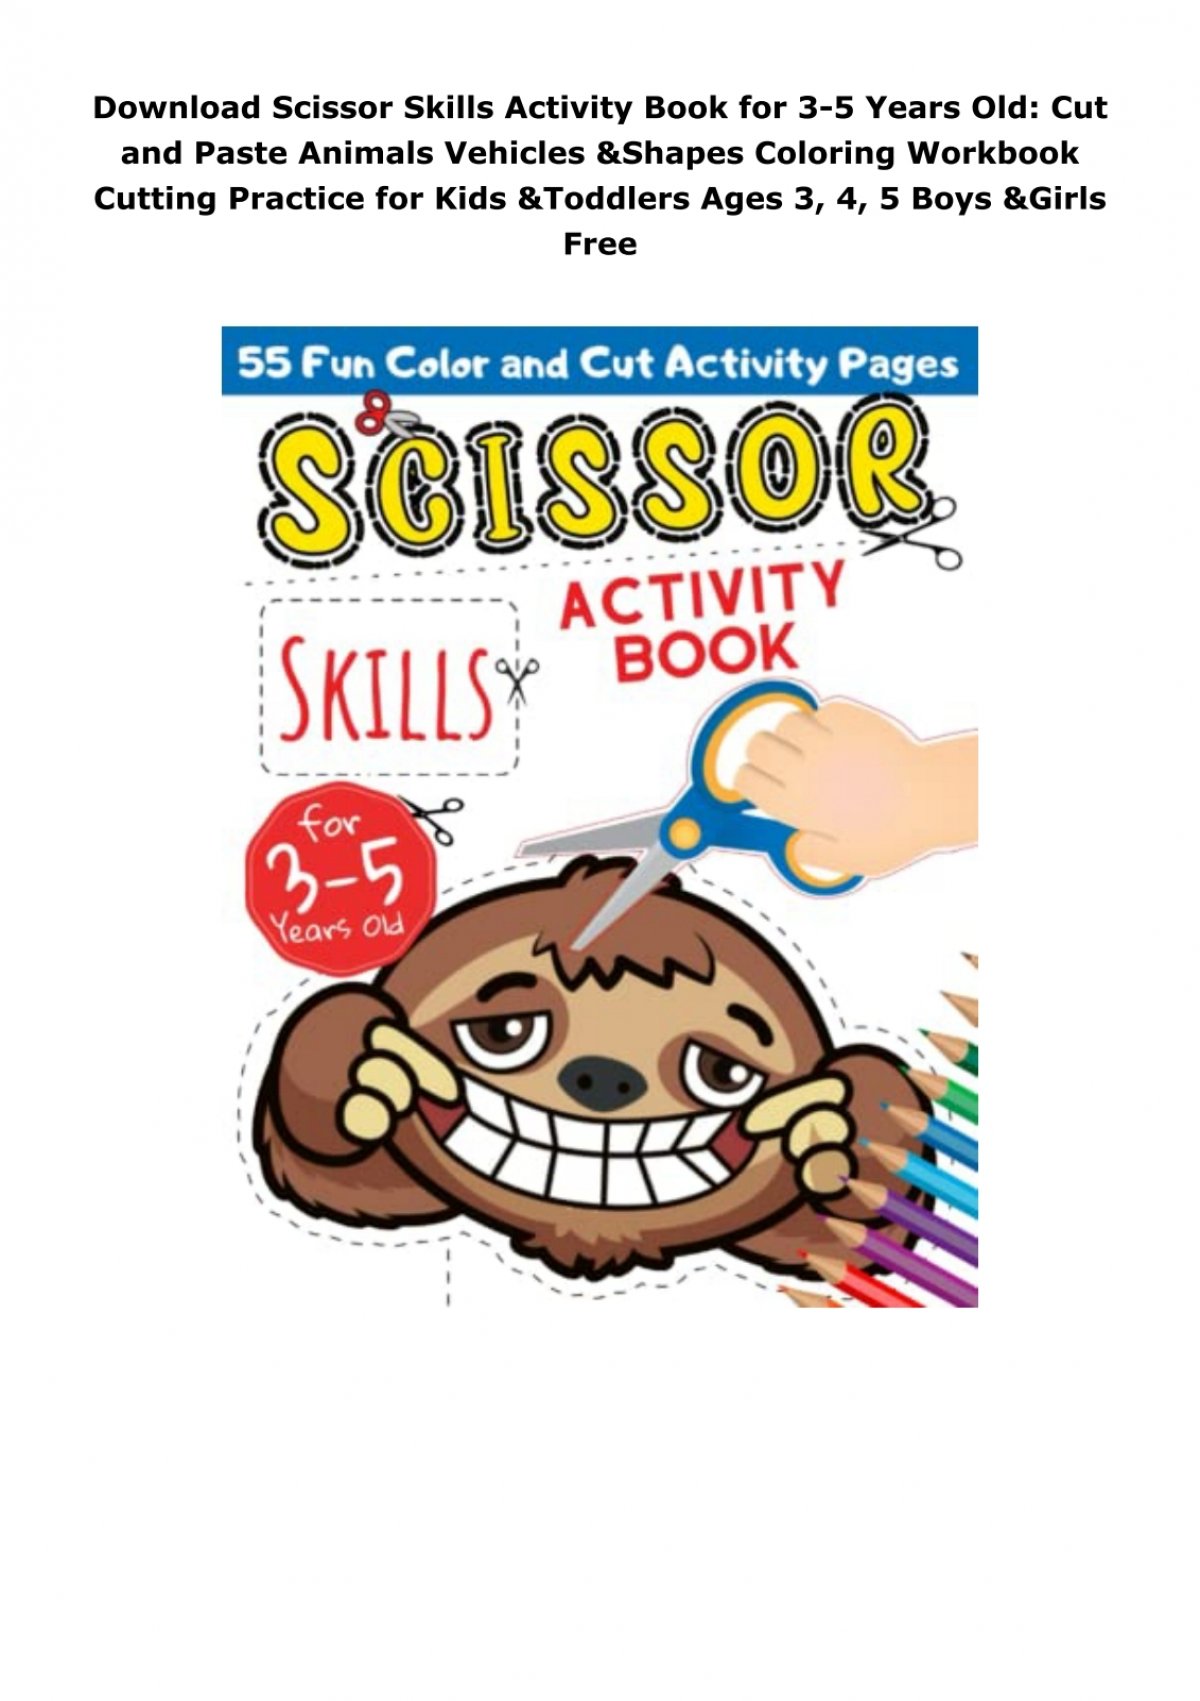  Vehicles Scissor Skills Activity Book for kids ages 3